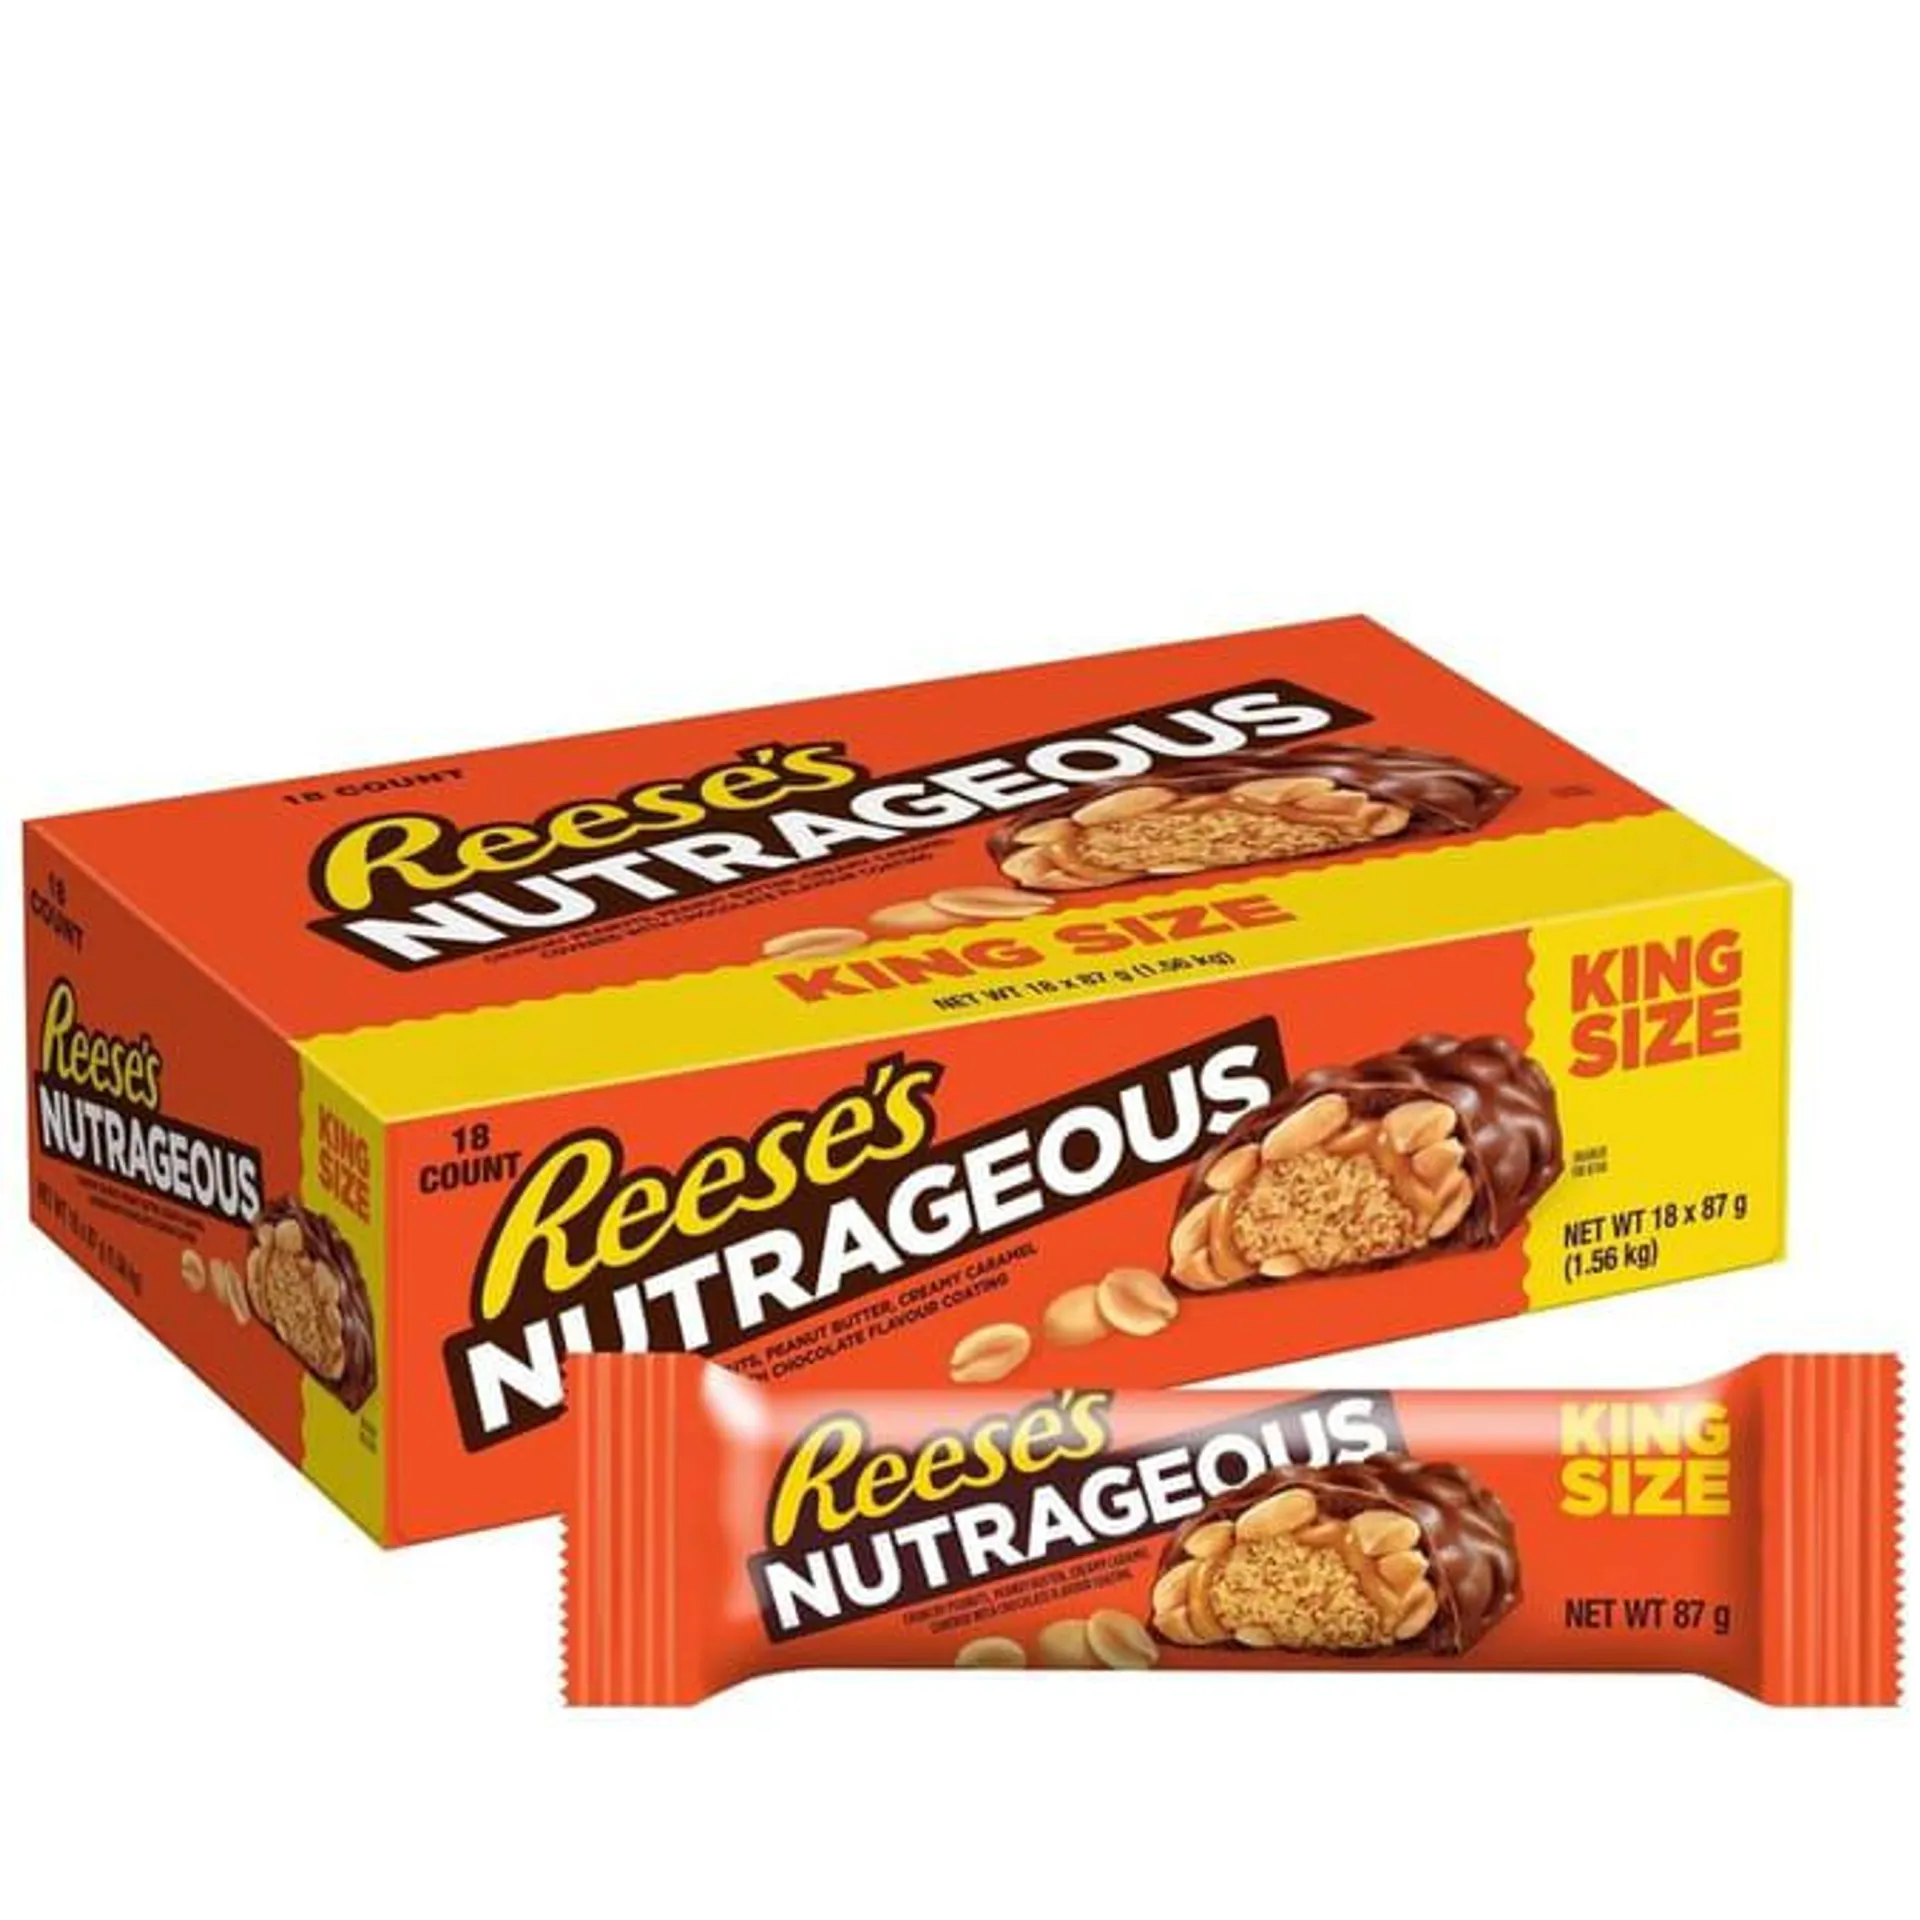 Reese's Nutrageous King Size 87g x18